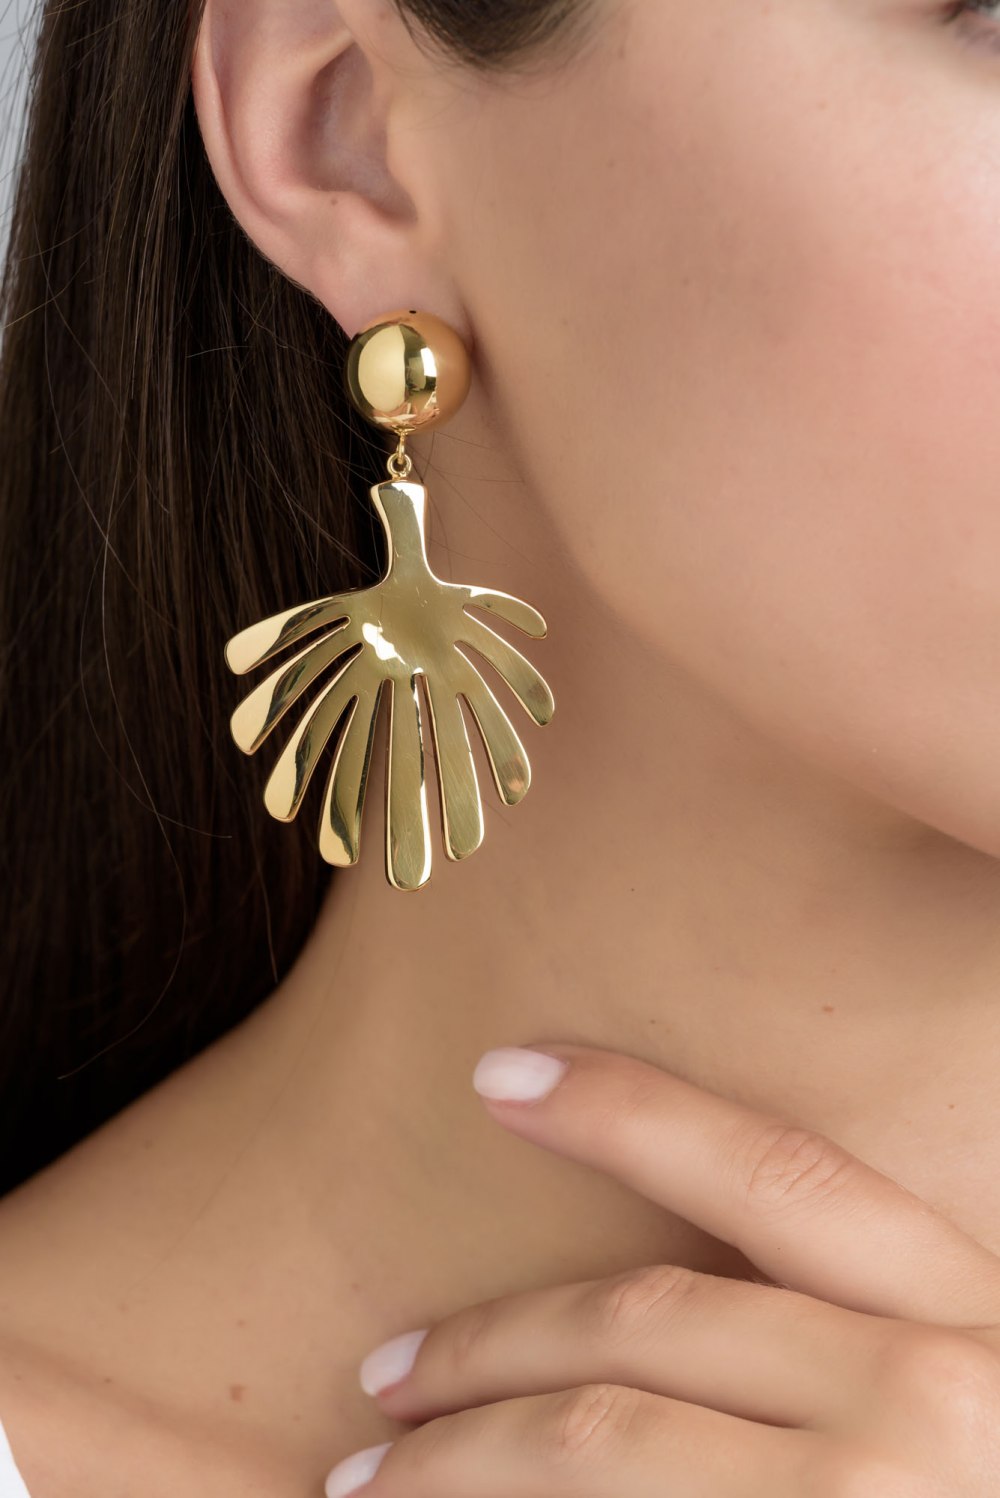 Statement Gold Tropical Hanging Earrings